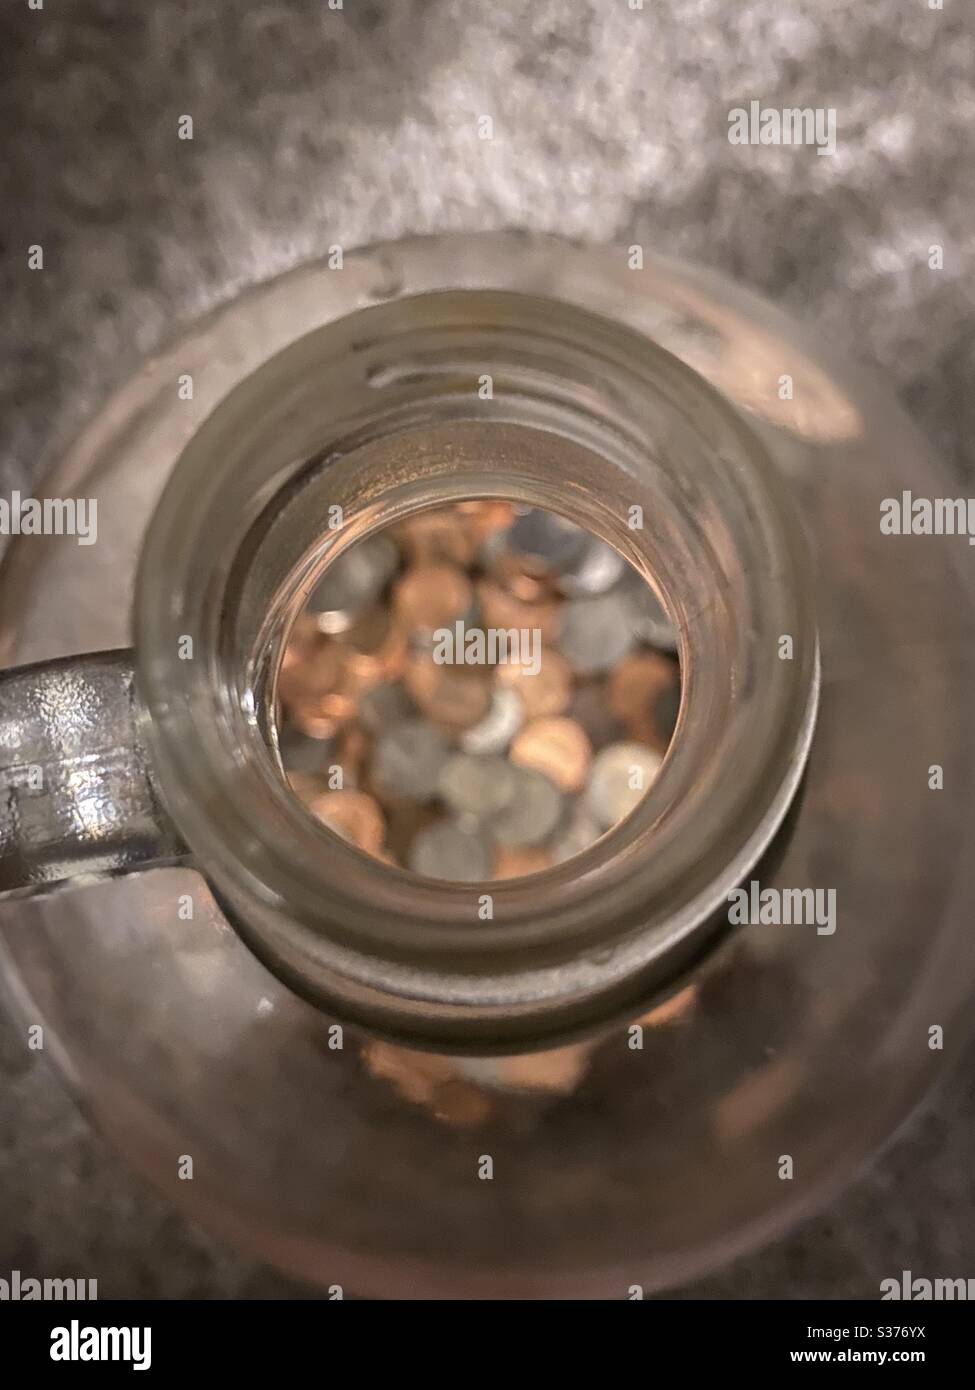 Coins in glass jug Stock Photo